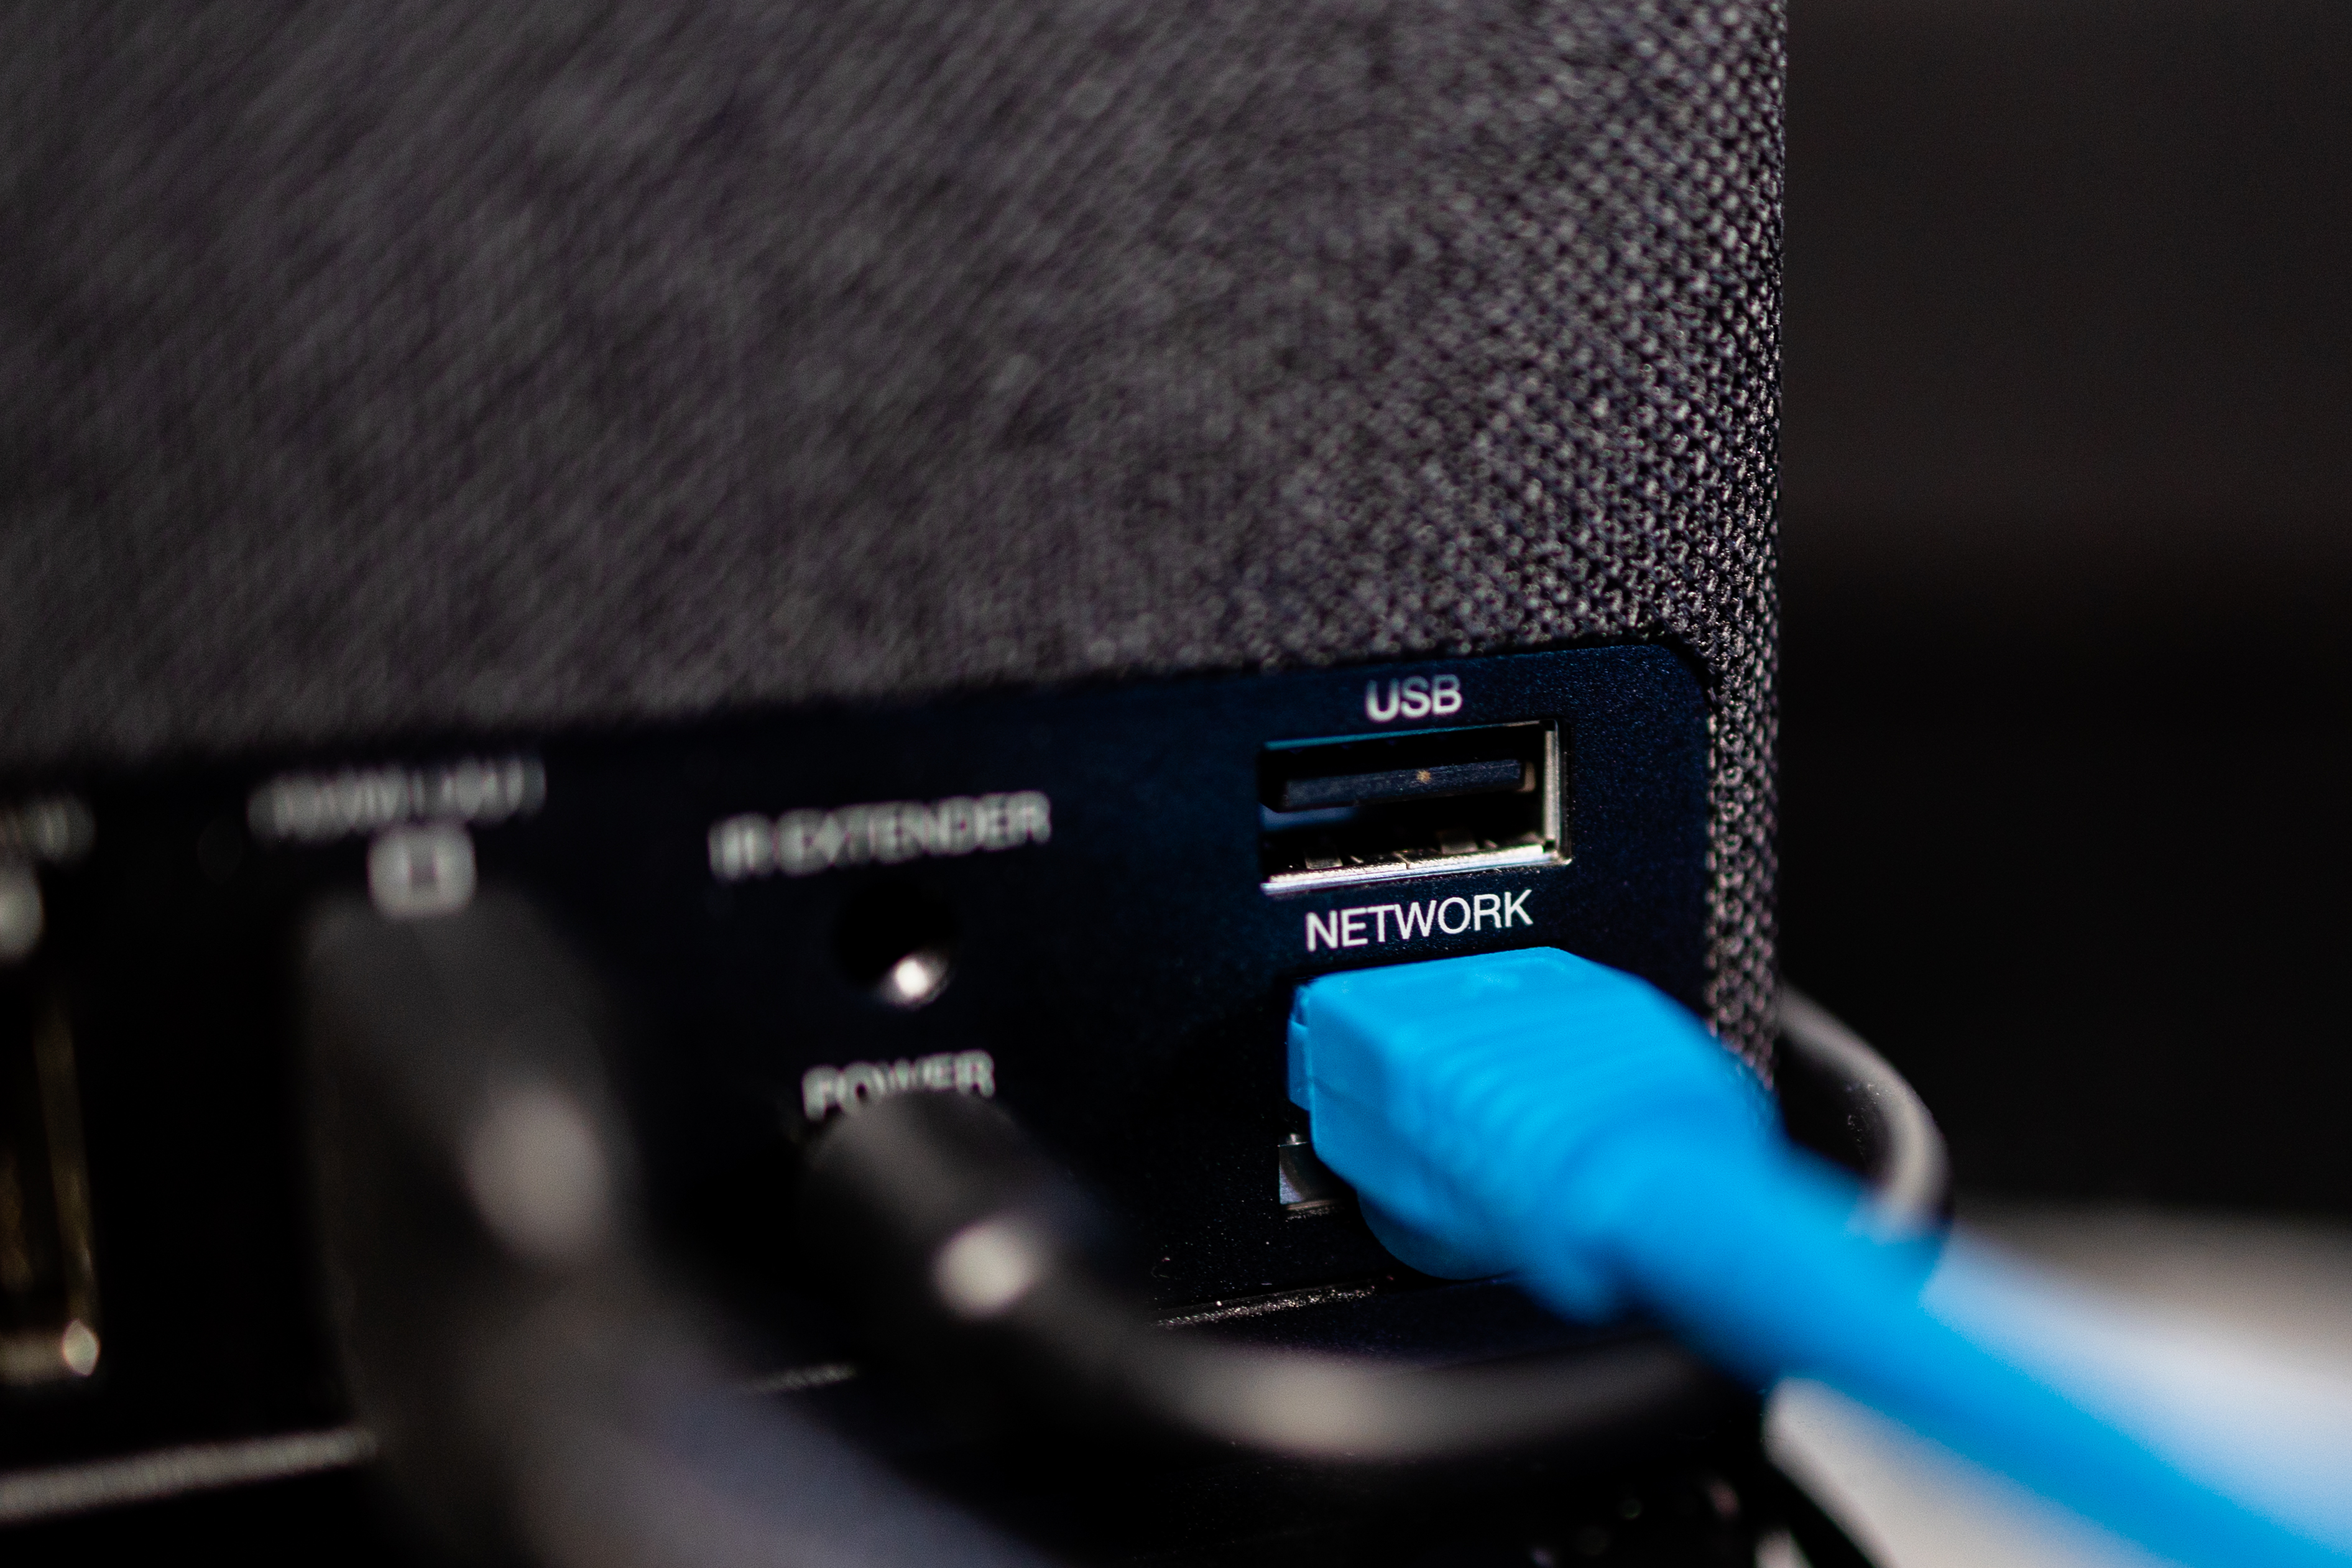 How to Add an Ethernet Adapter to  Fire TV Stick 